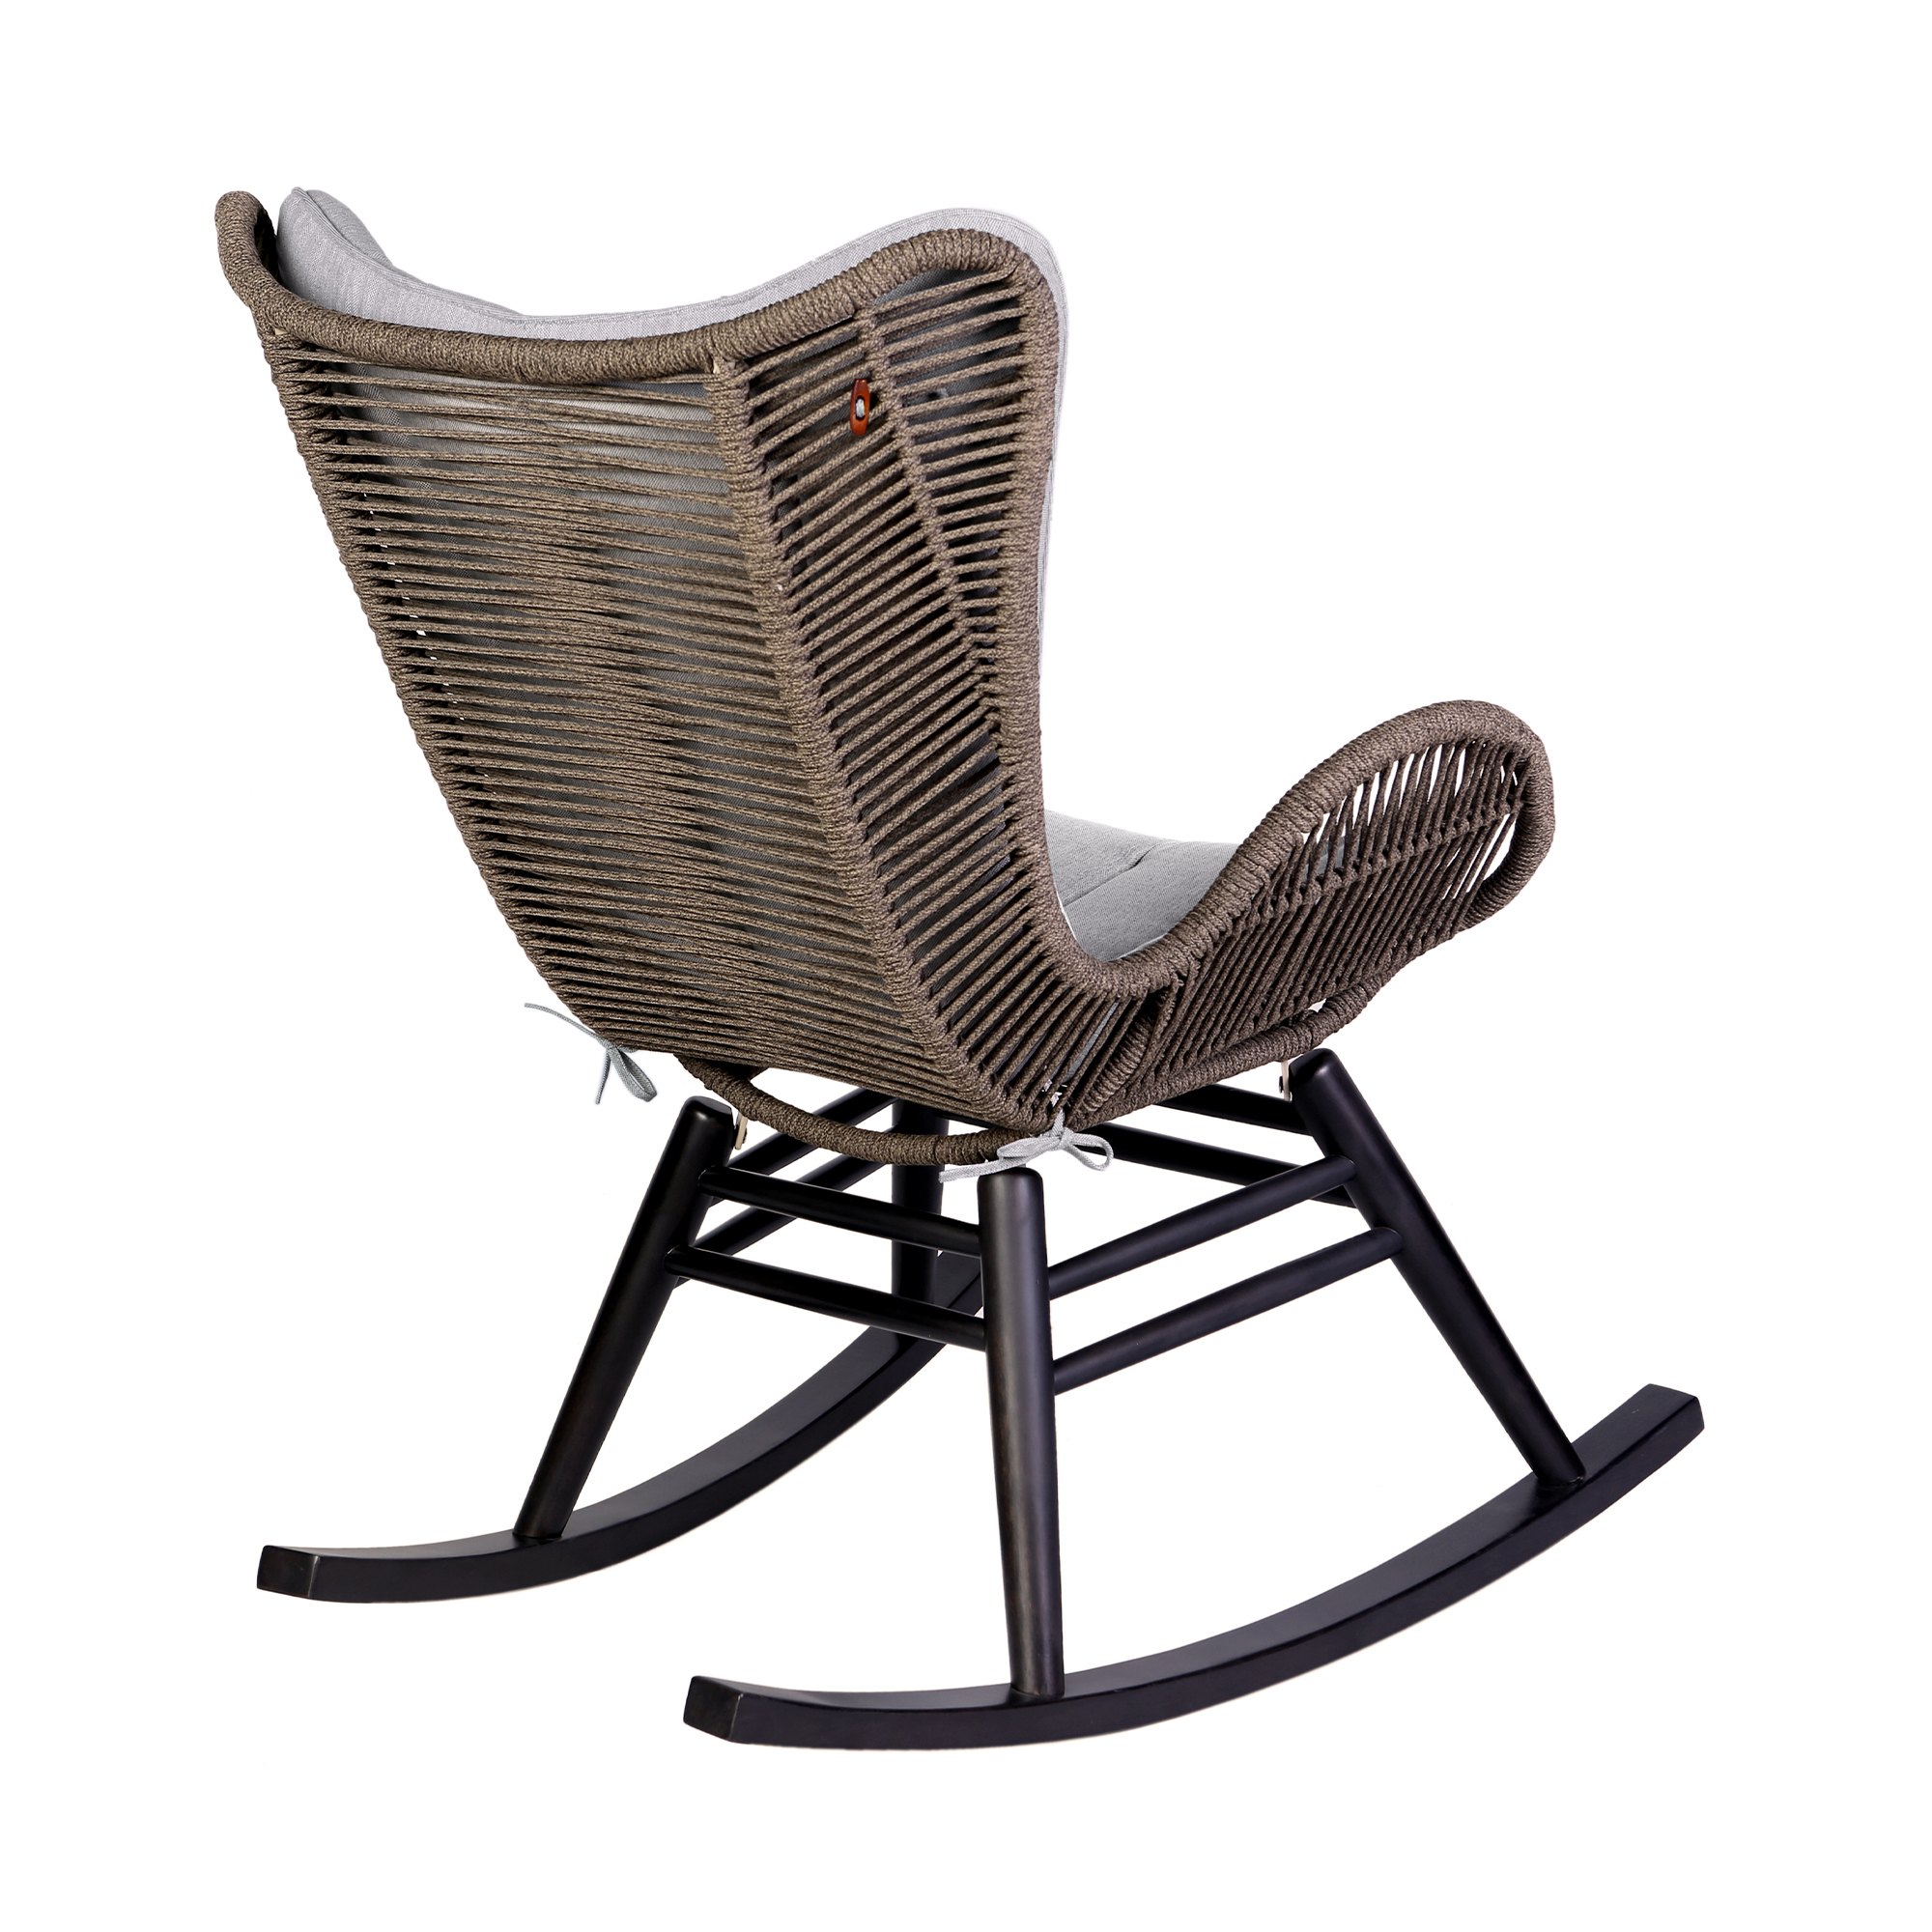 Fanny Outdoor Patio Rocking chair in Dark Eucalyptus Wood and Truffle Rope - image 5 of 12